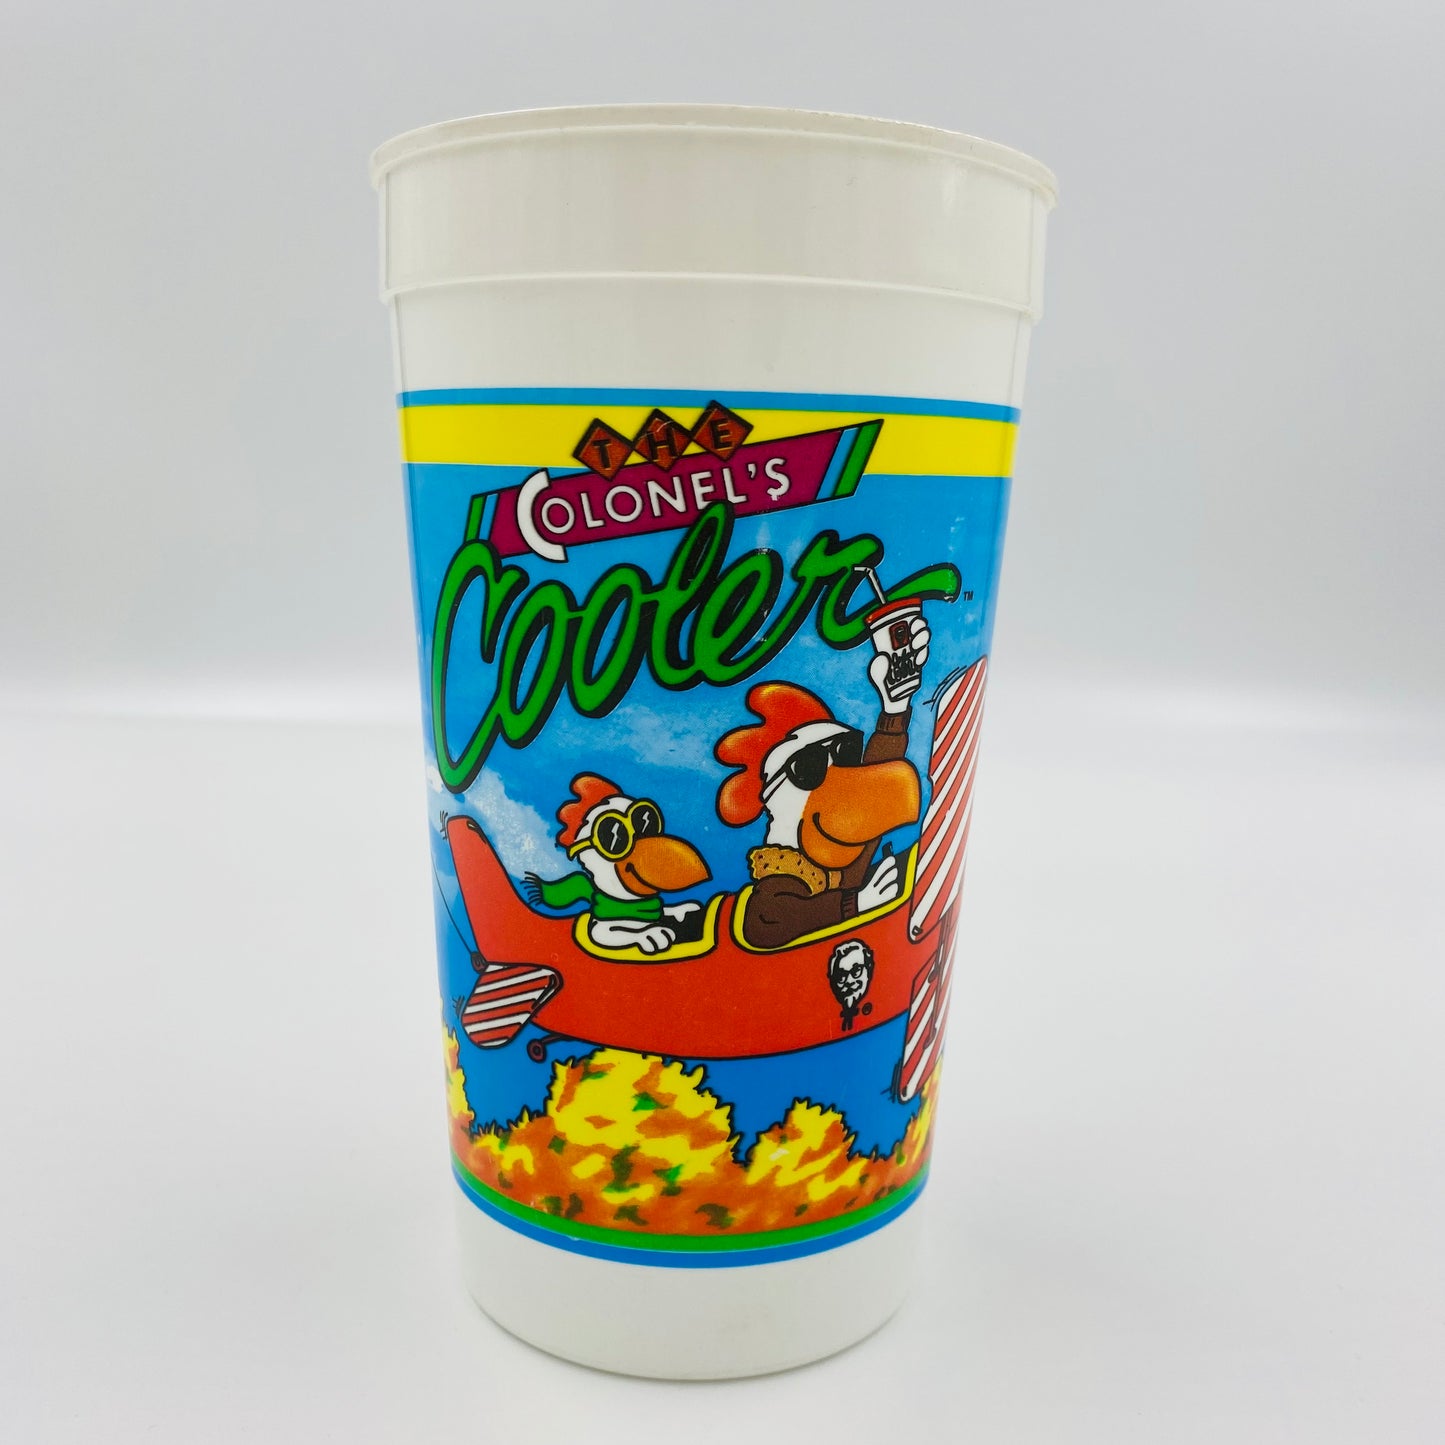 KFC The Colonel’s Cooler 32oz plastic cup